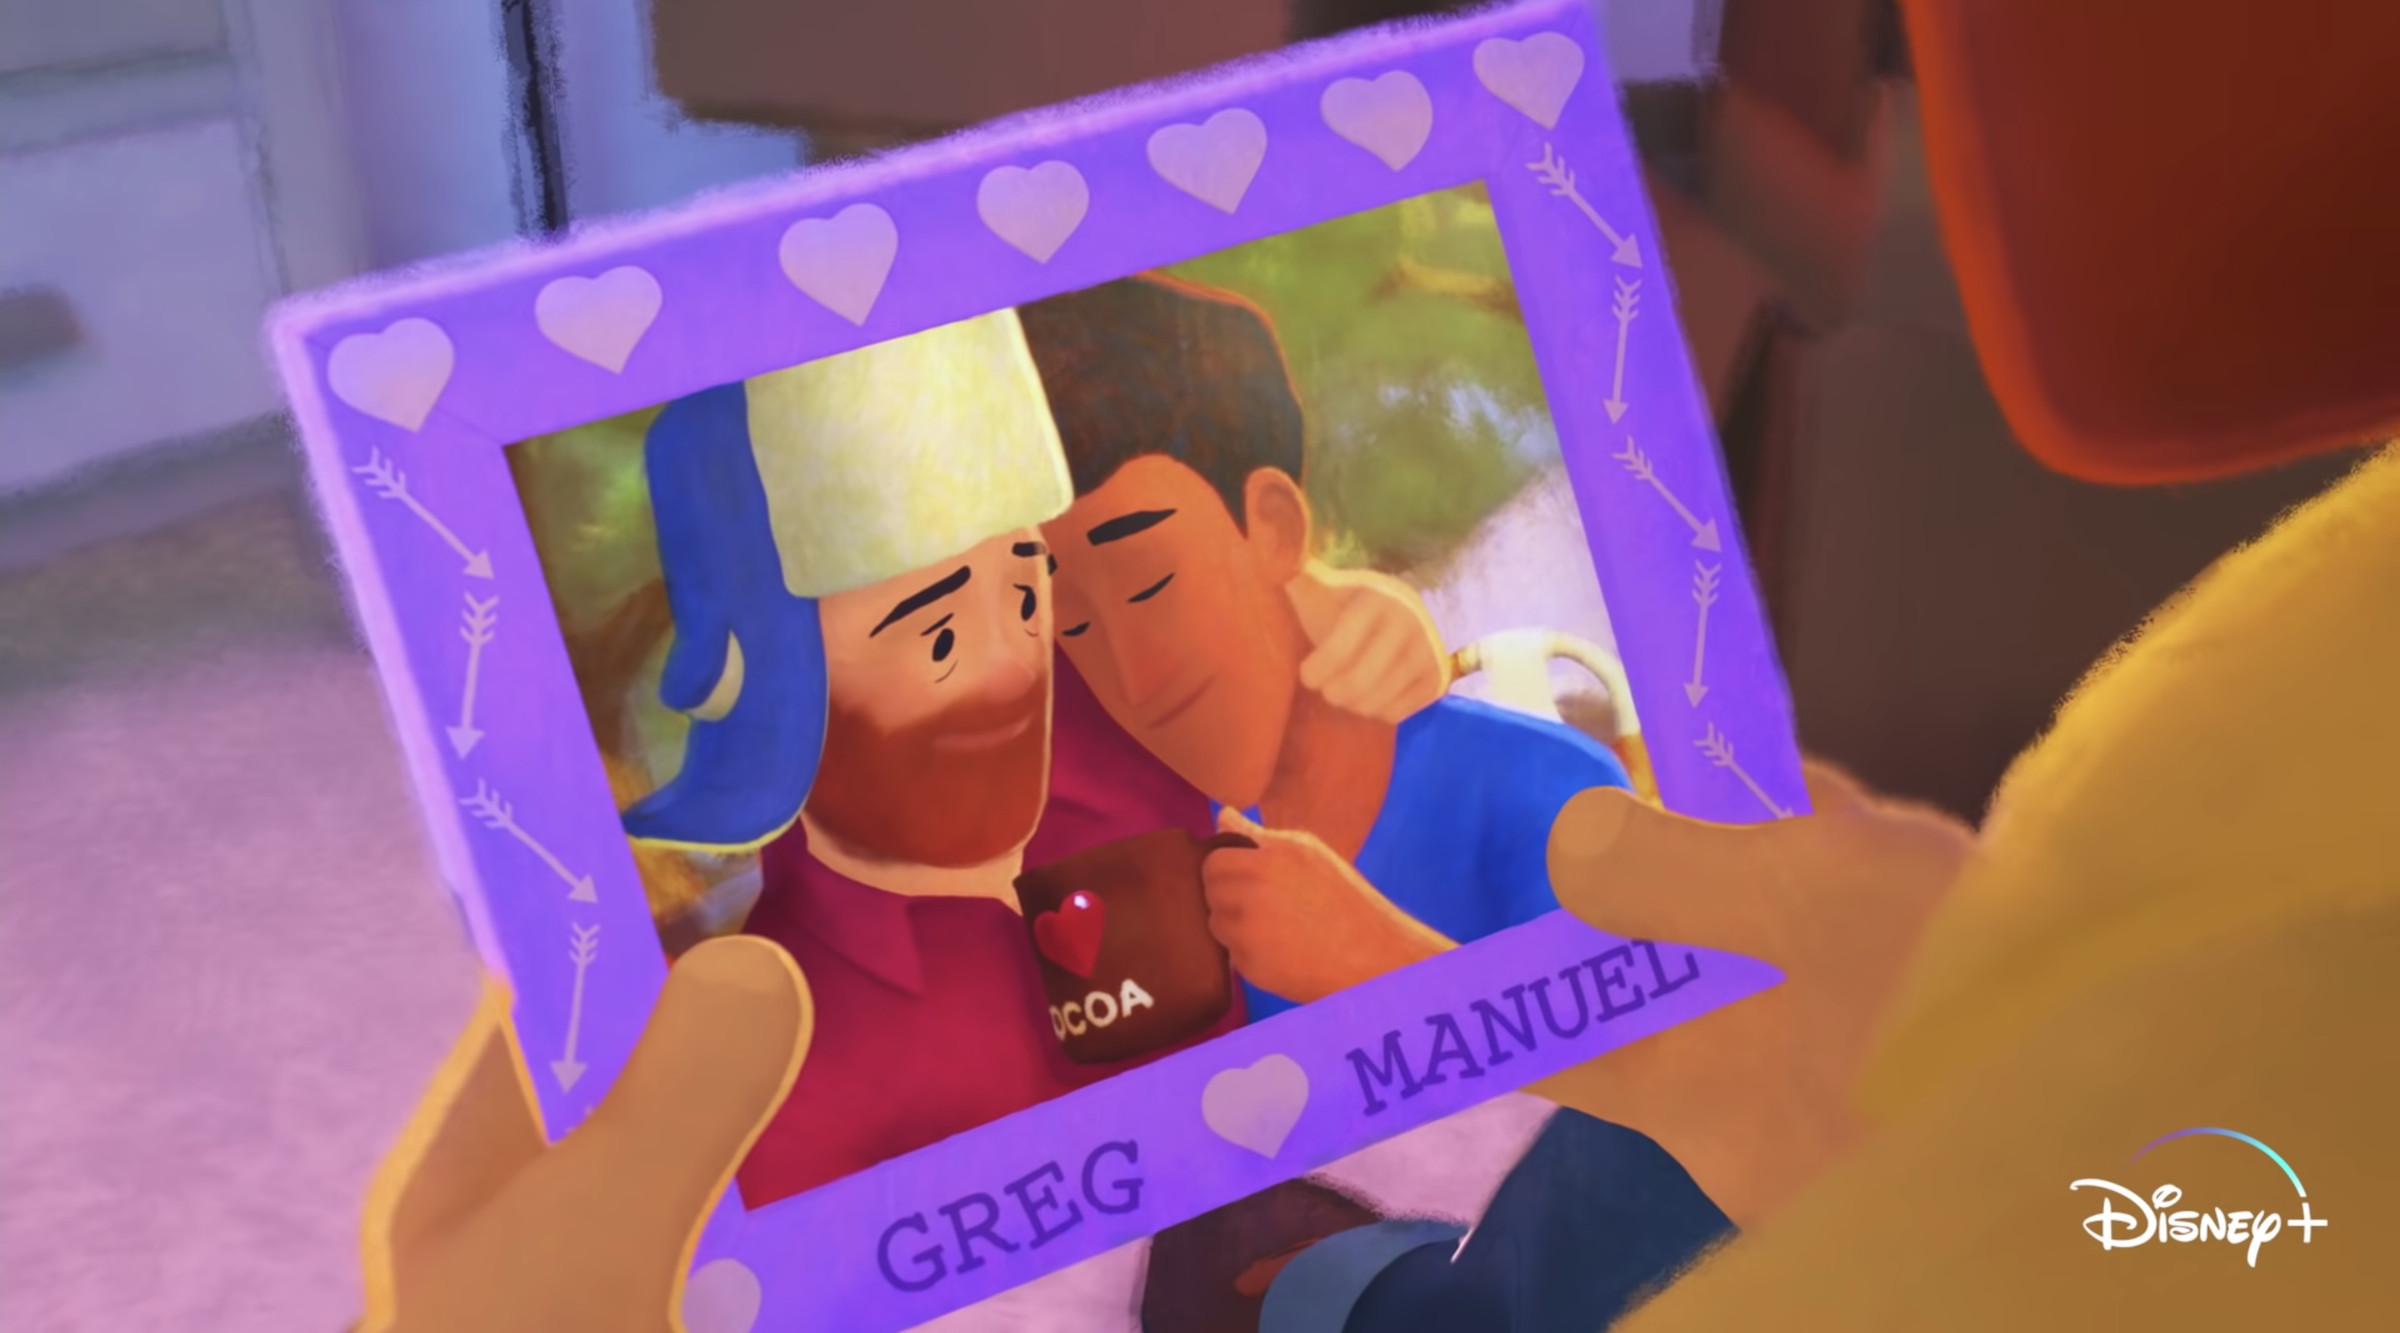 Greg and Manuel, two characters from Disney and Pixar’s short film, Out.